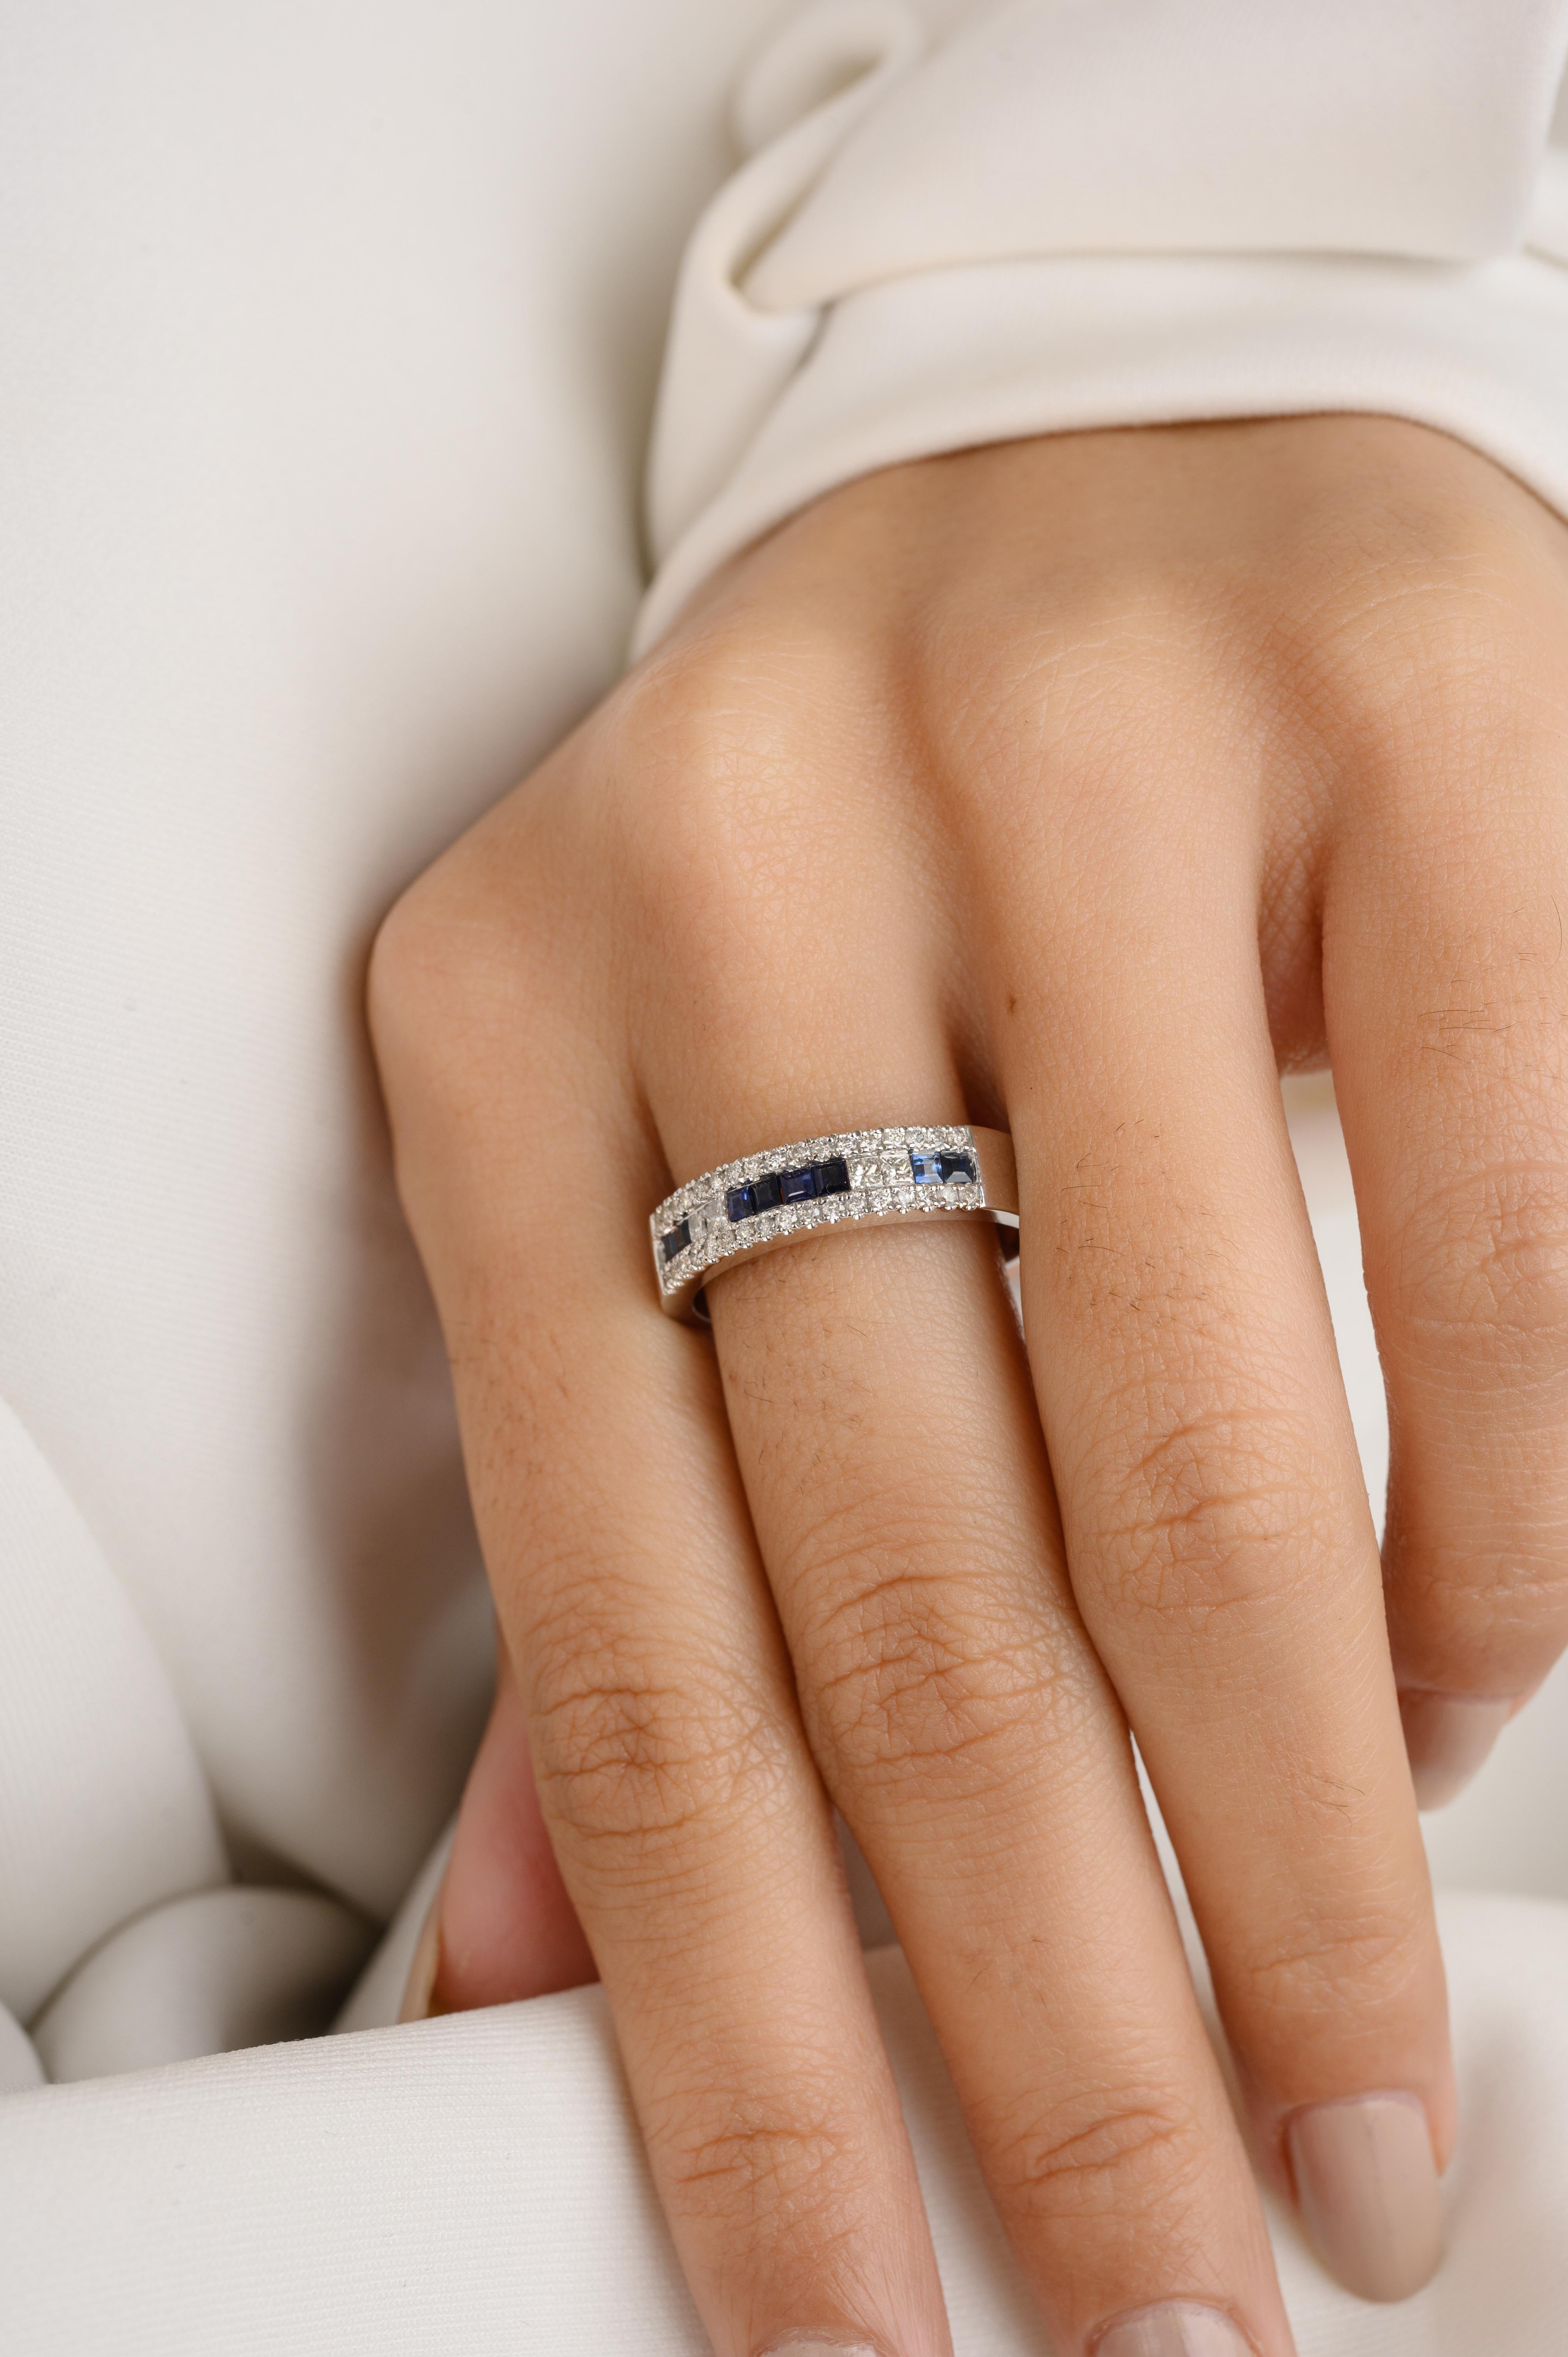 For Sale:  Stunning Blue Sapphire Diamond Engagement Band Ring for Her in 18k White Gold 8